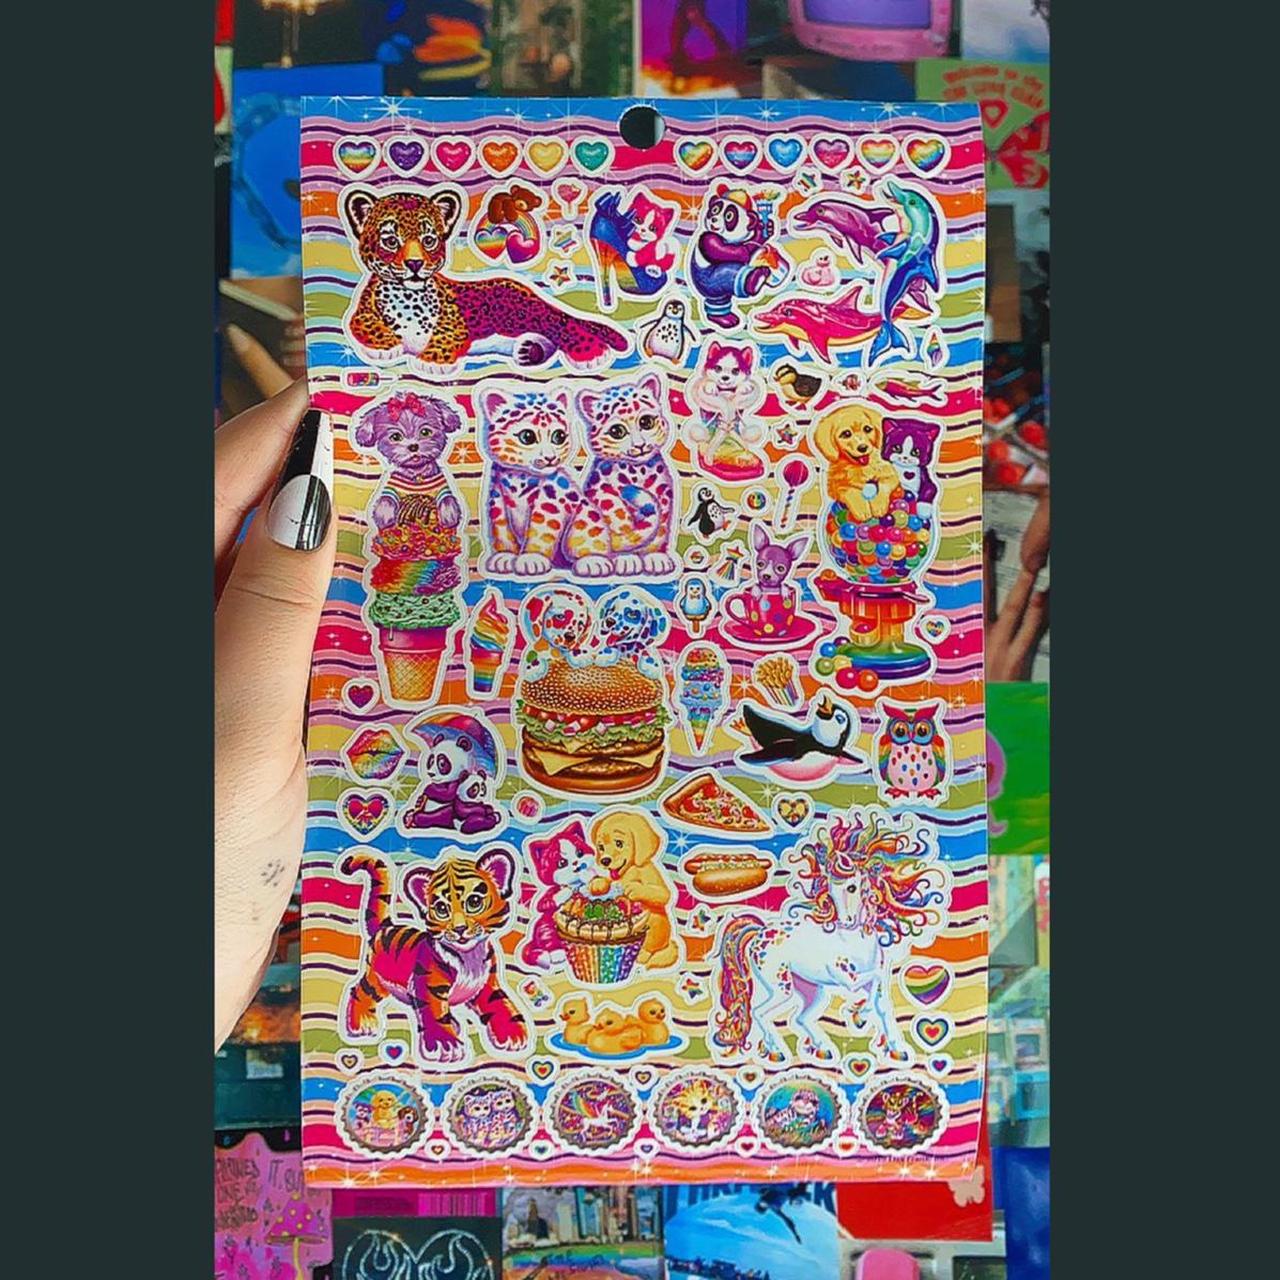 Reviewing The Vintage Lisa Frank Stickers Being Sold At Urban Outfitters